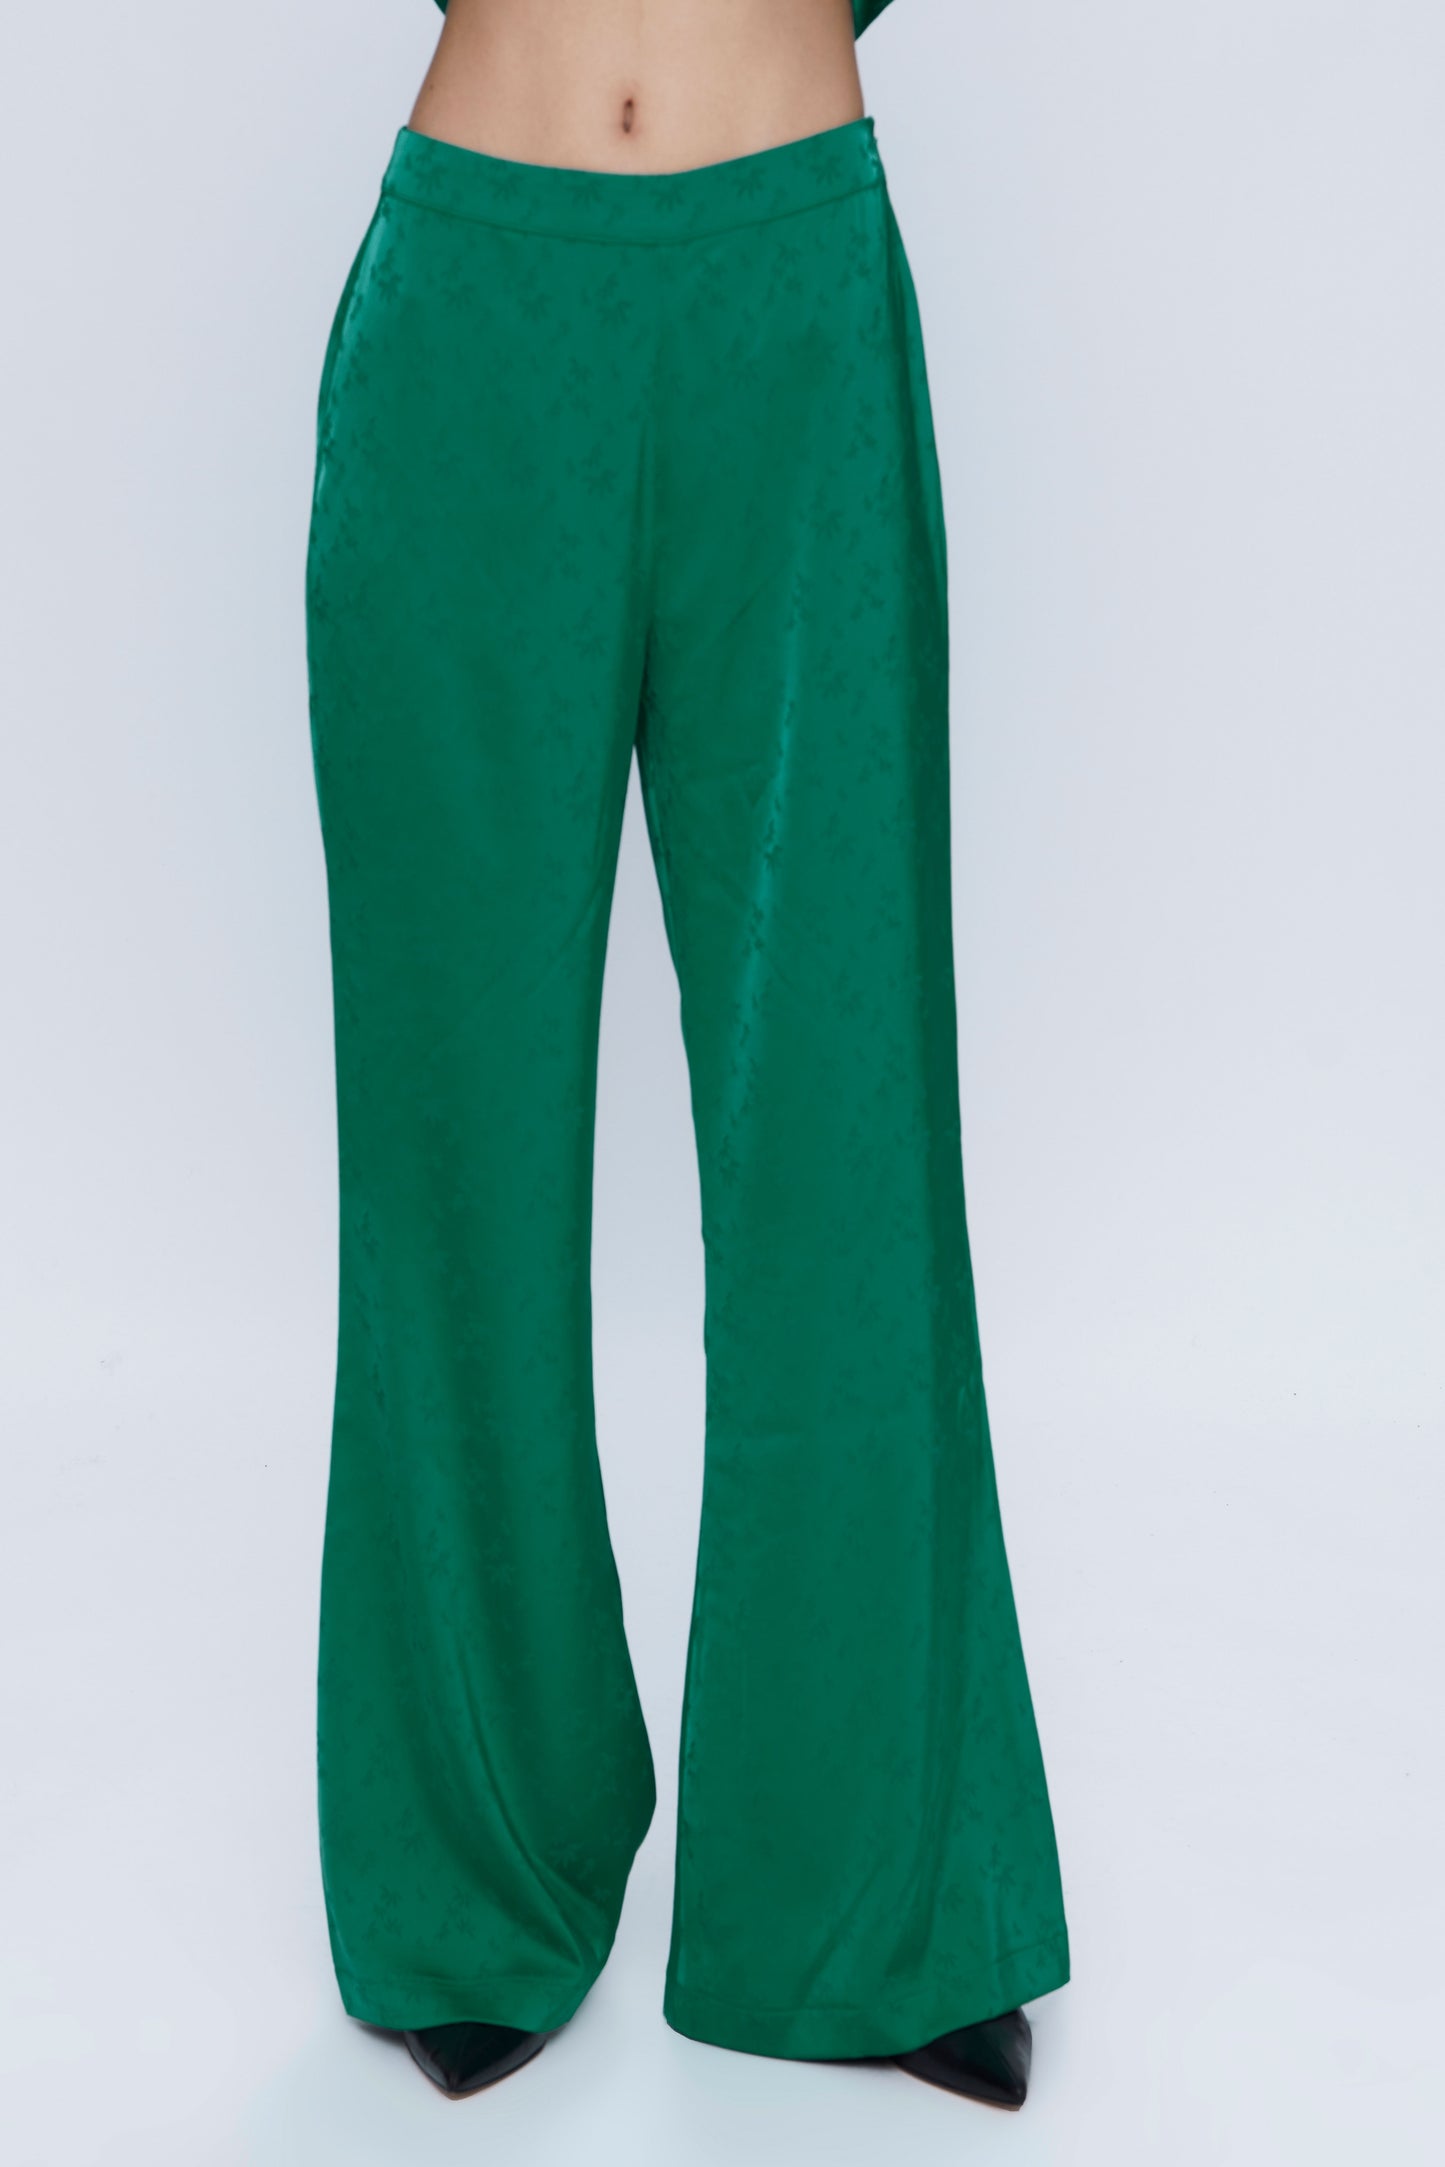 Flowing suit pants in green jacquard